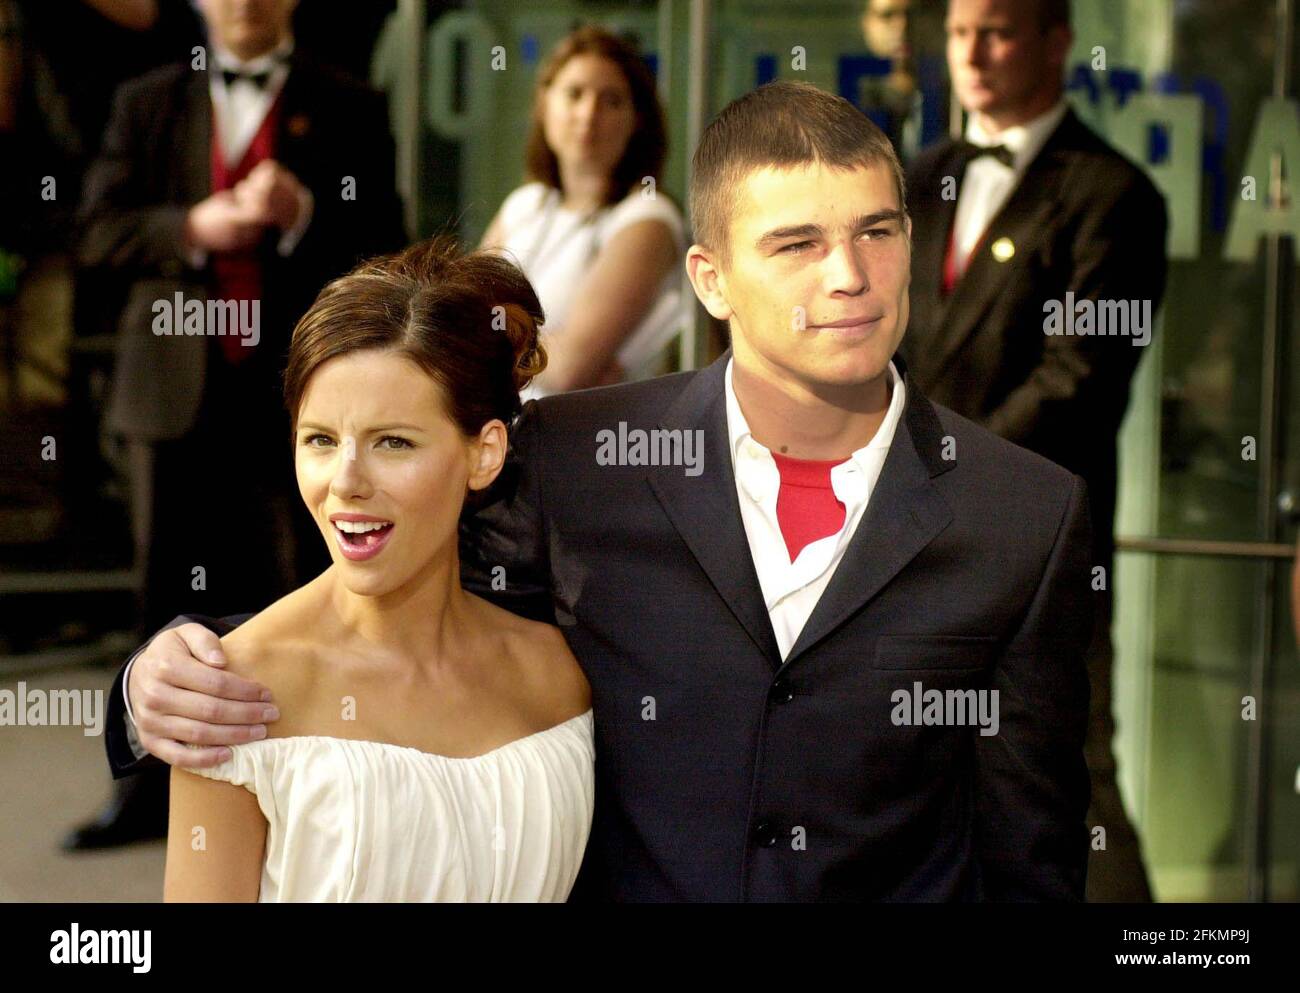 BRITISH ACTRESS KATE BECKINSALE ARRIVING AT THE BRITISH PREMIERE OF 'PEARL HARBOUR' WITH AMERICAN CO-ACTOR JOSH HARTNETT Stock Photo